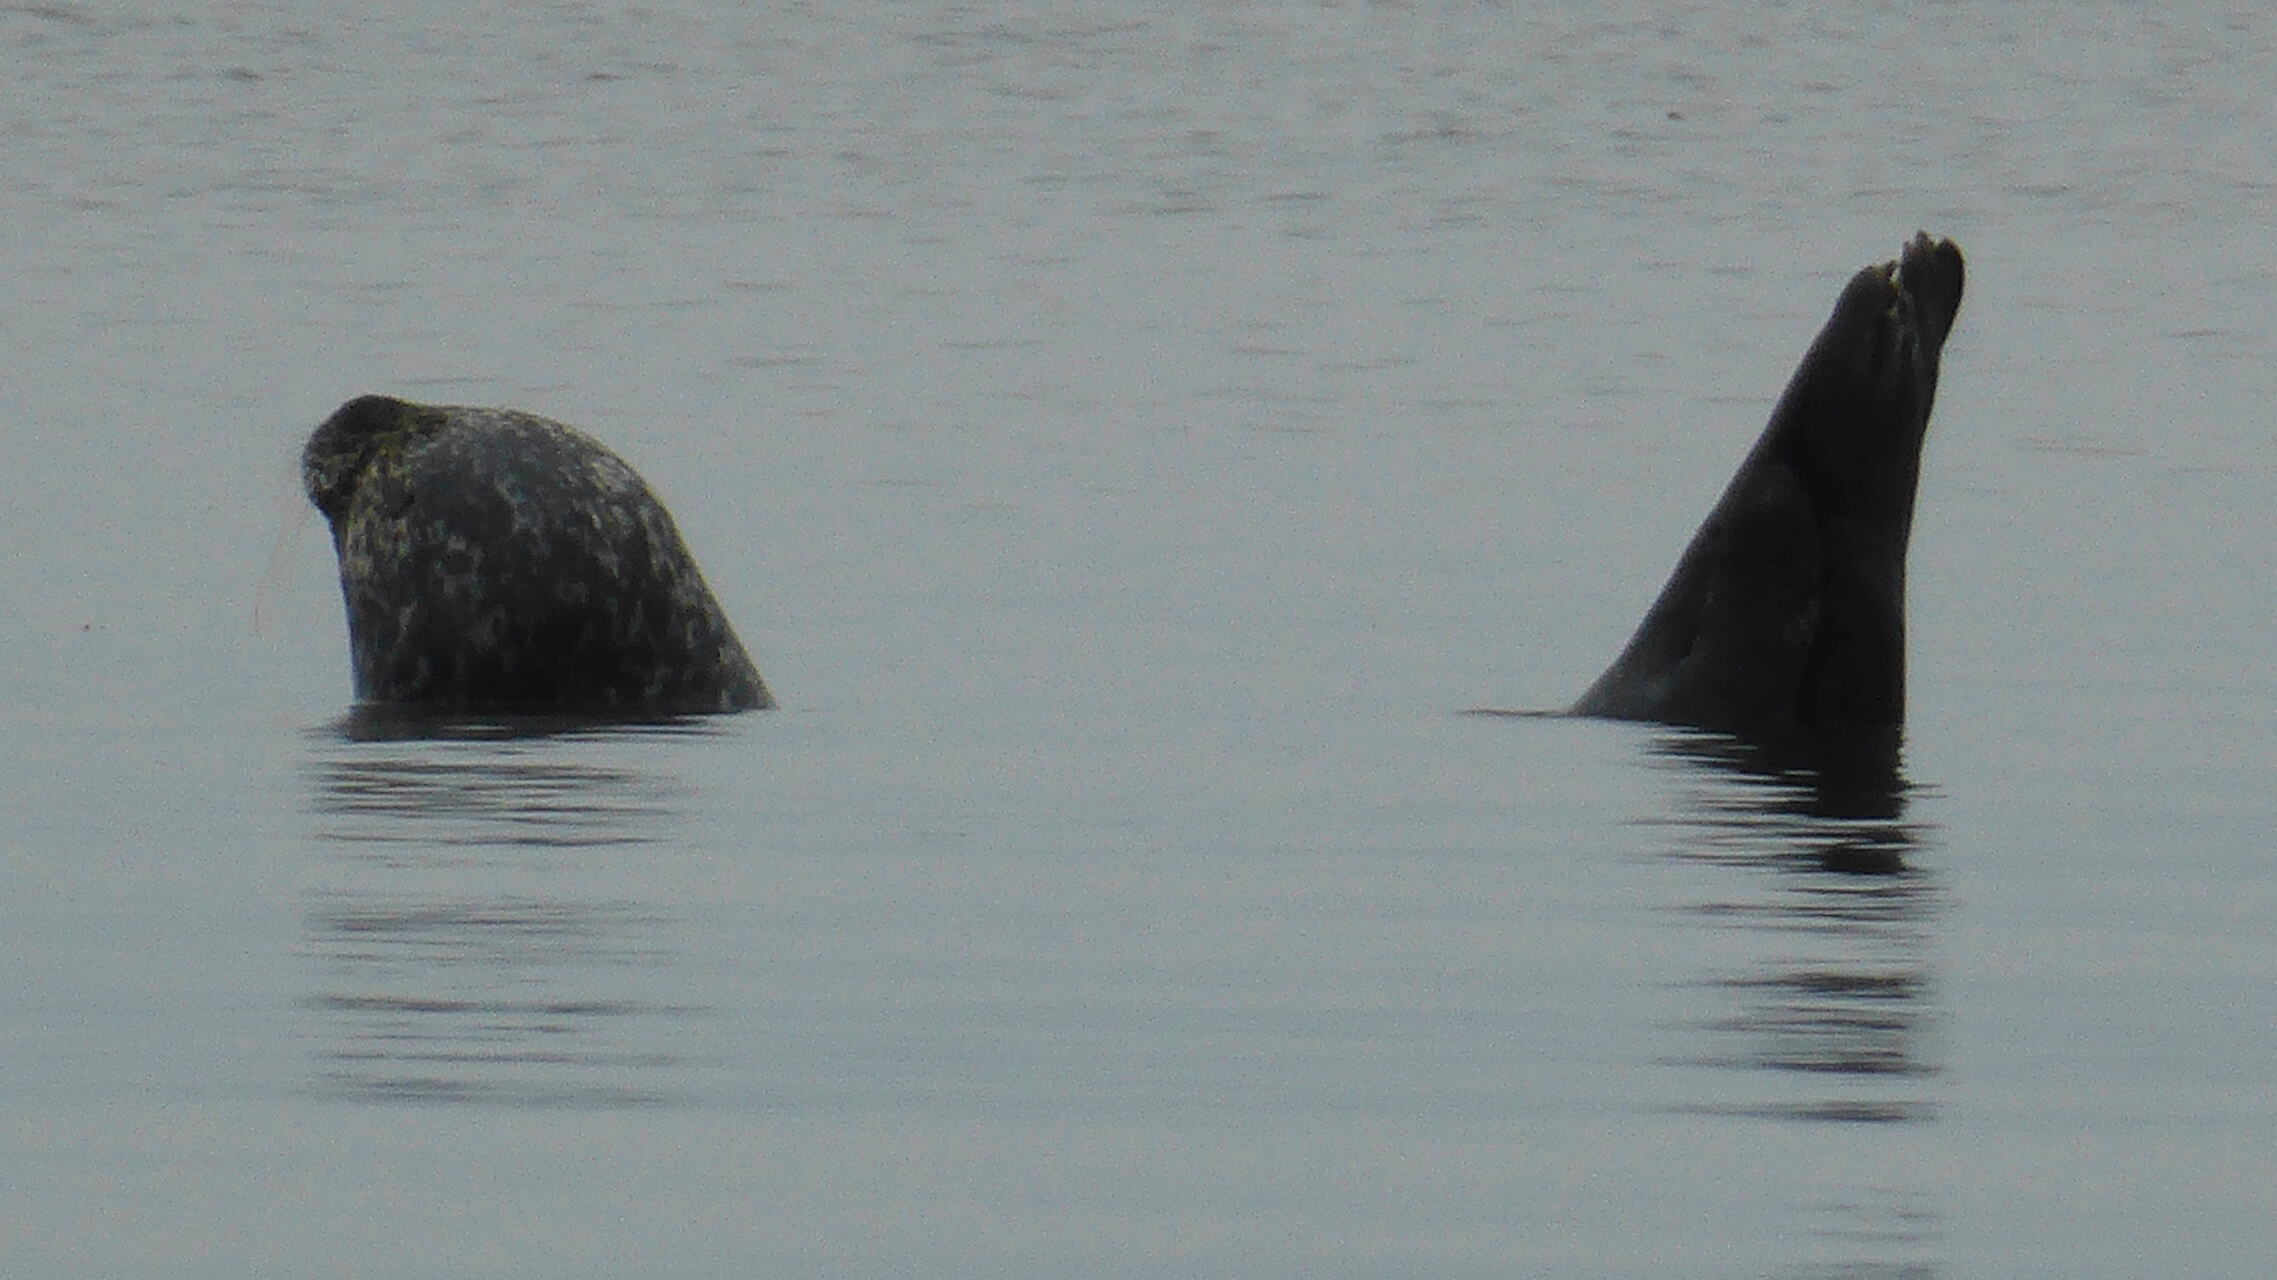 A seal's head and tail sticking out of the water